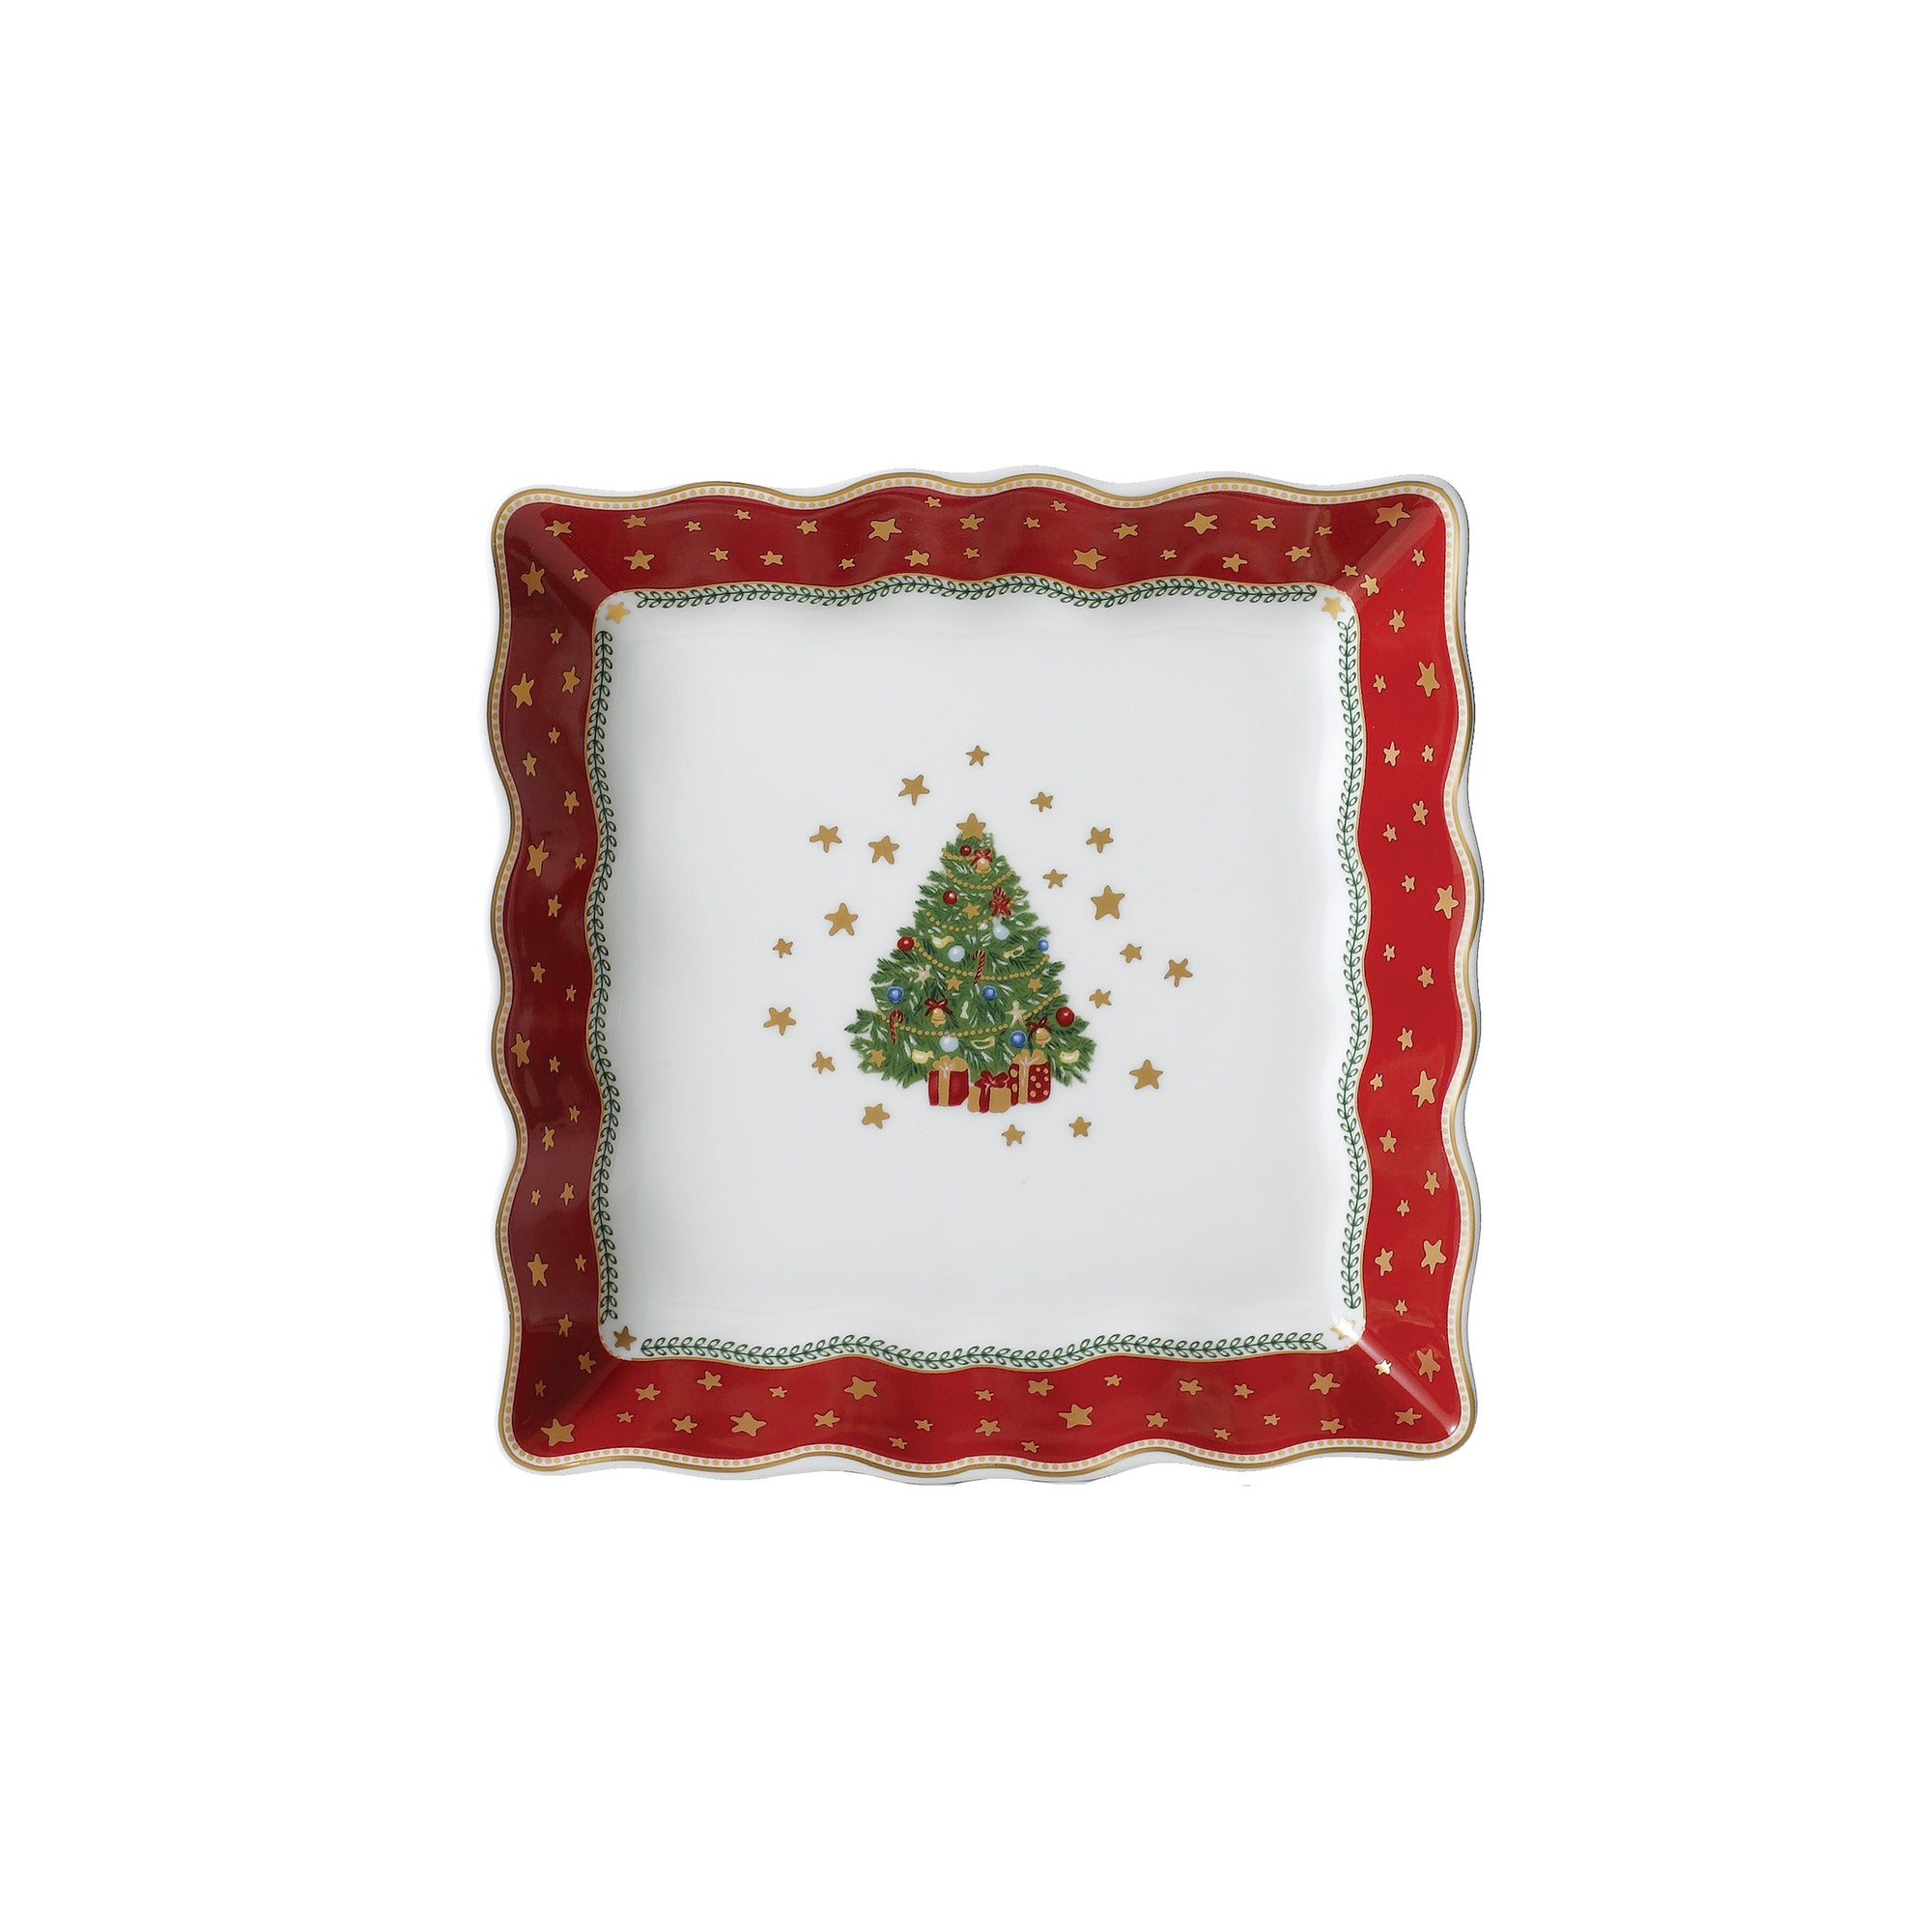 My Noel 7" Lace Square Tray White Background Photo